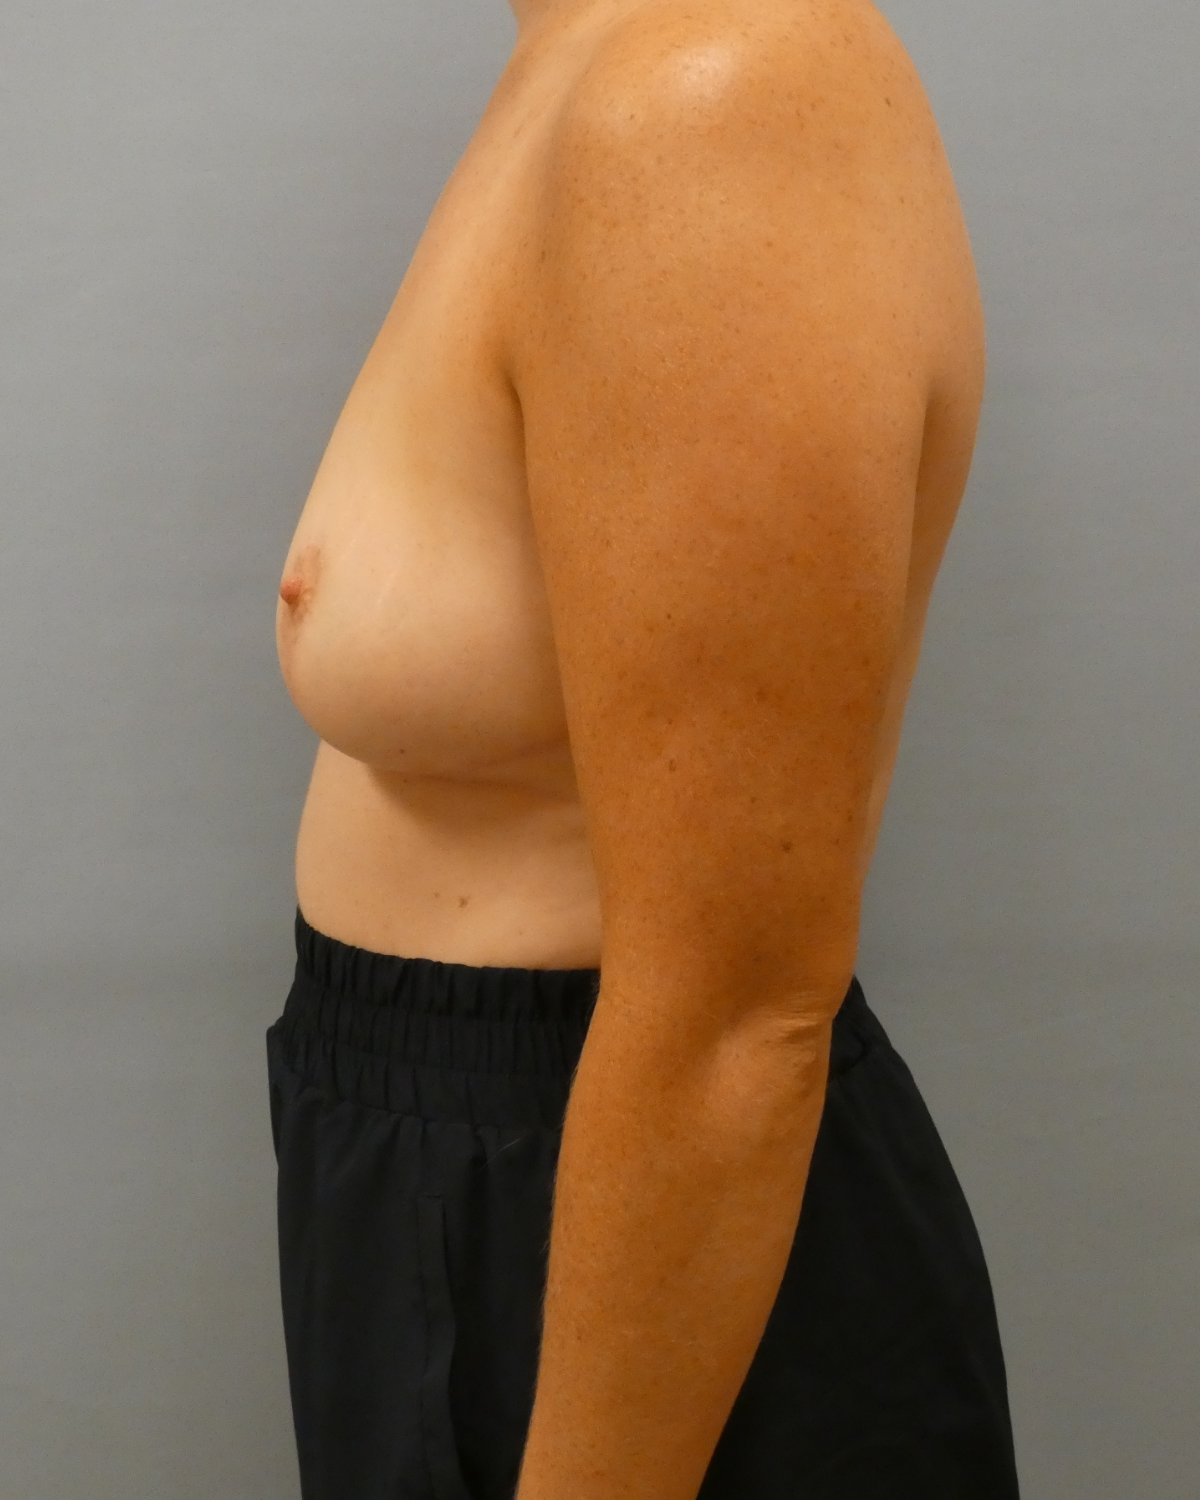 Breast Reduction Gallery After Patient 1